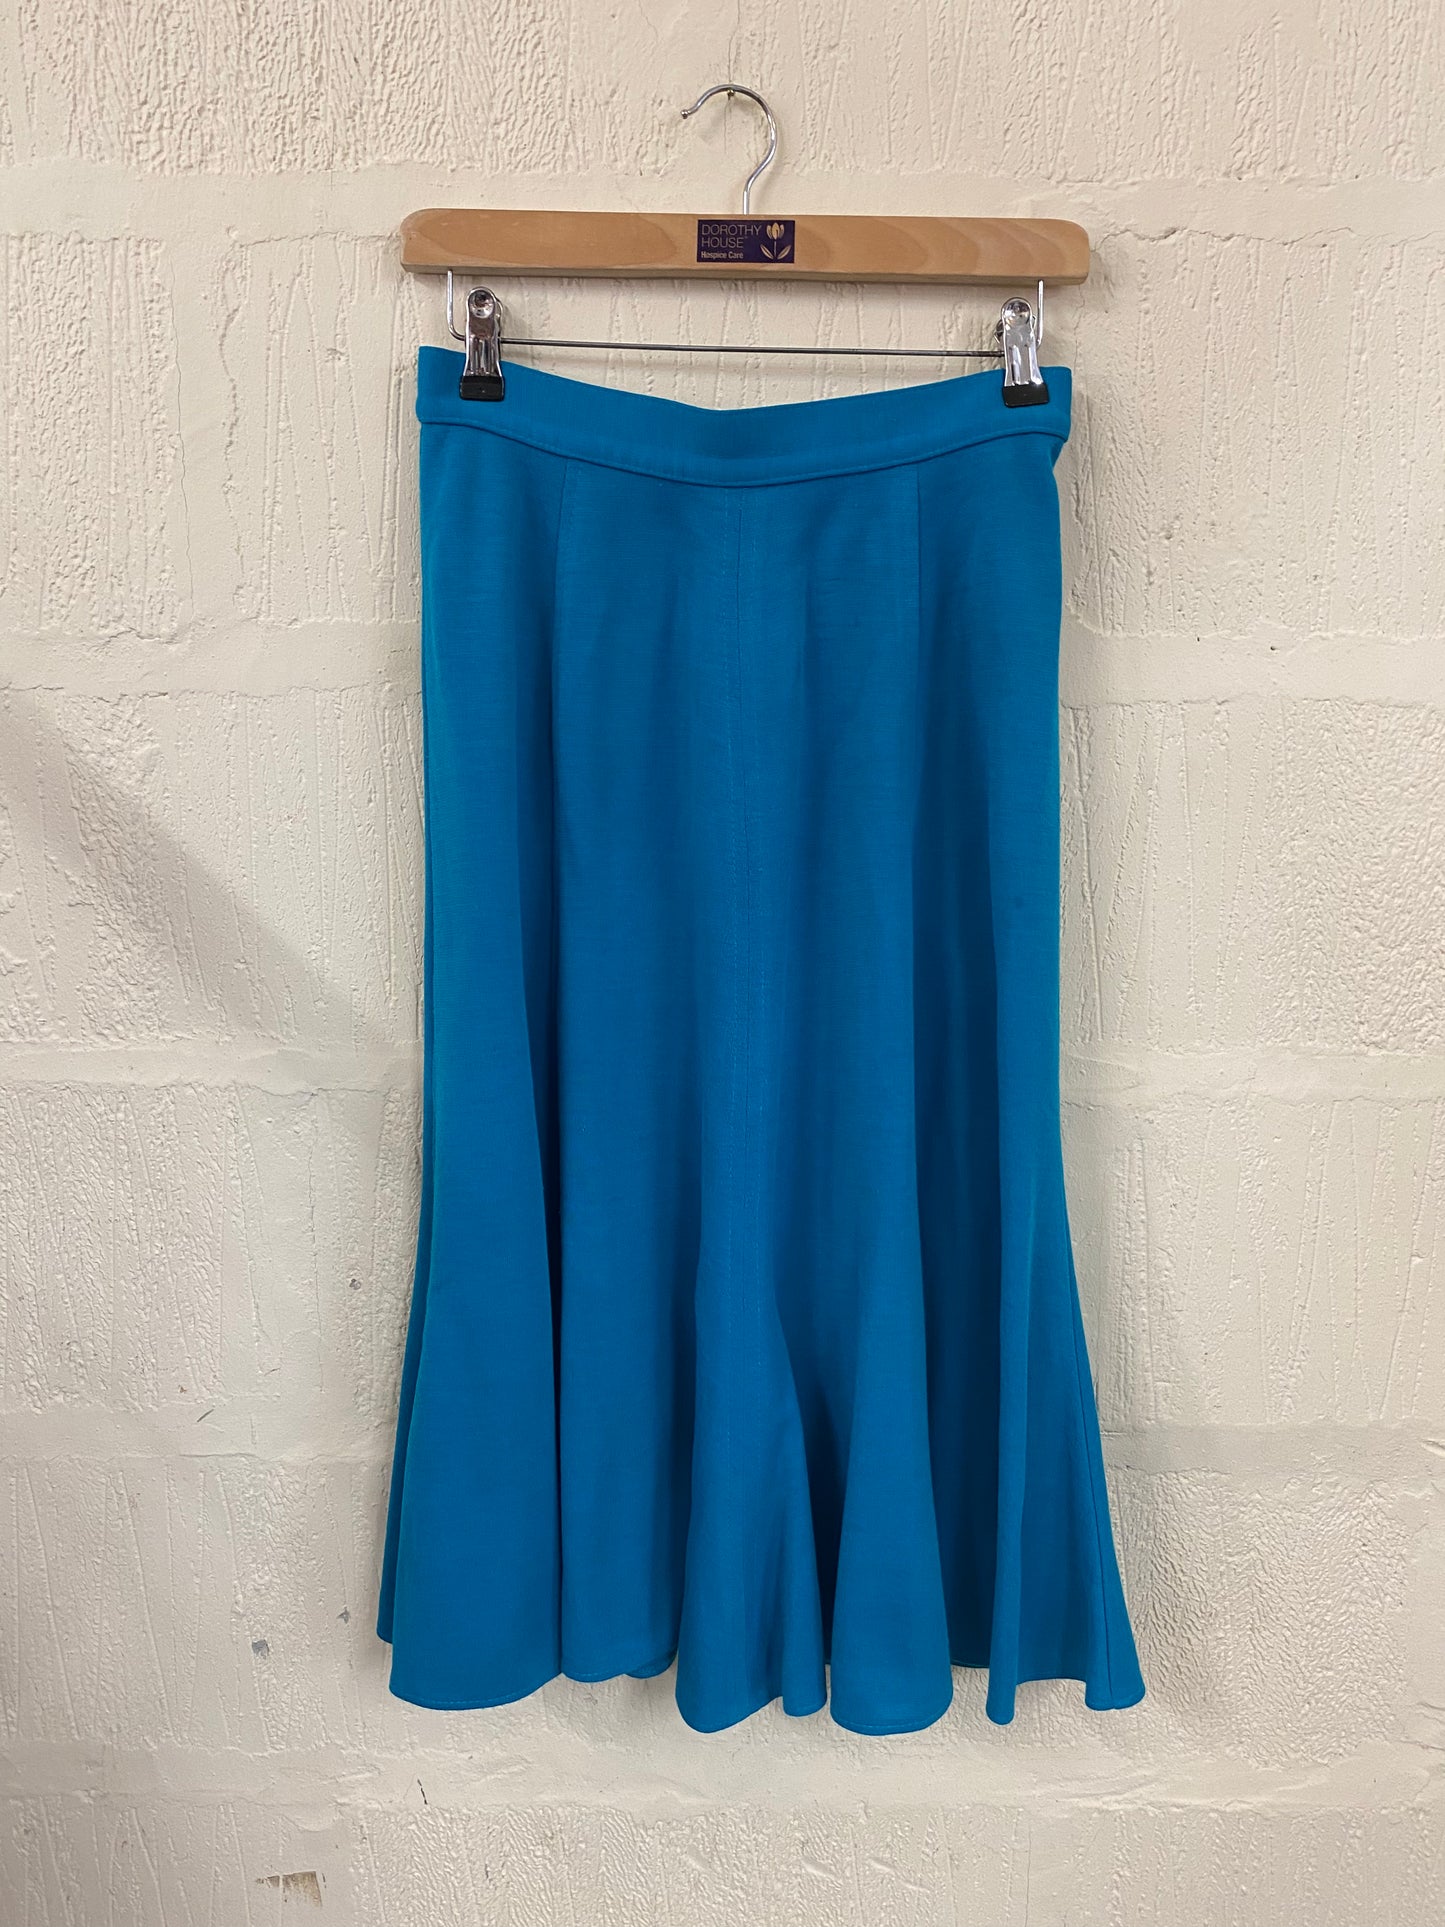 Vintage St Michael Jersey Turquoise Skirt Size 10